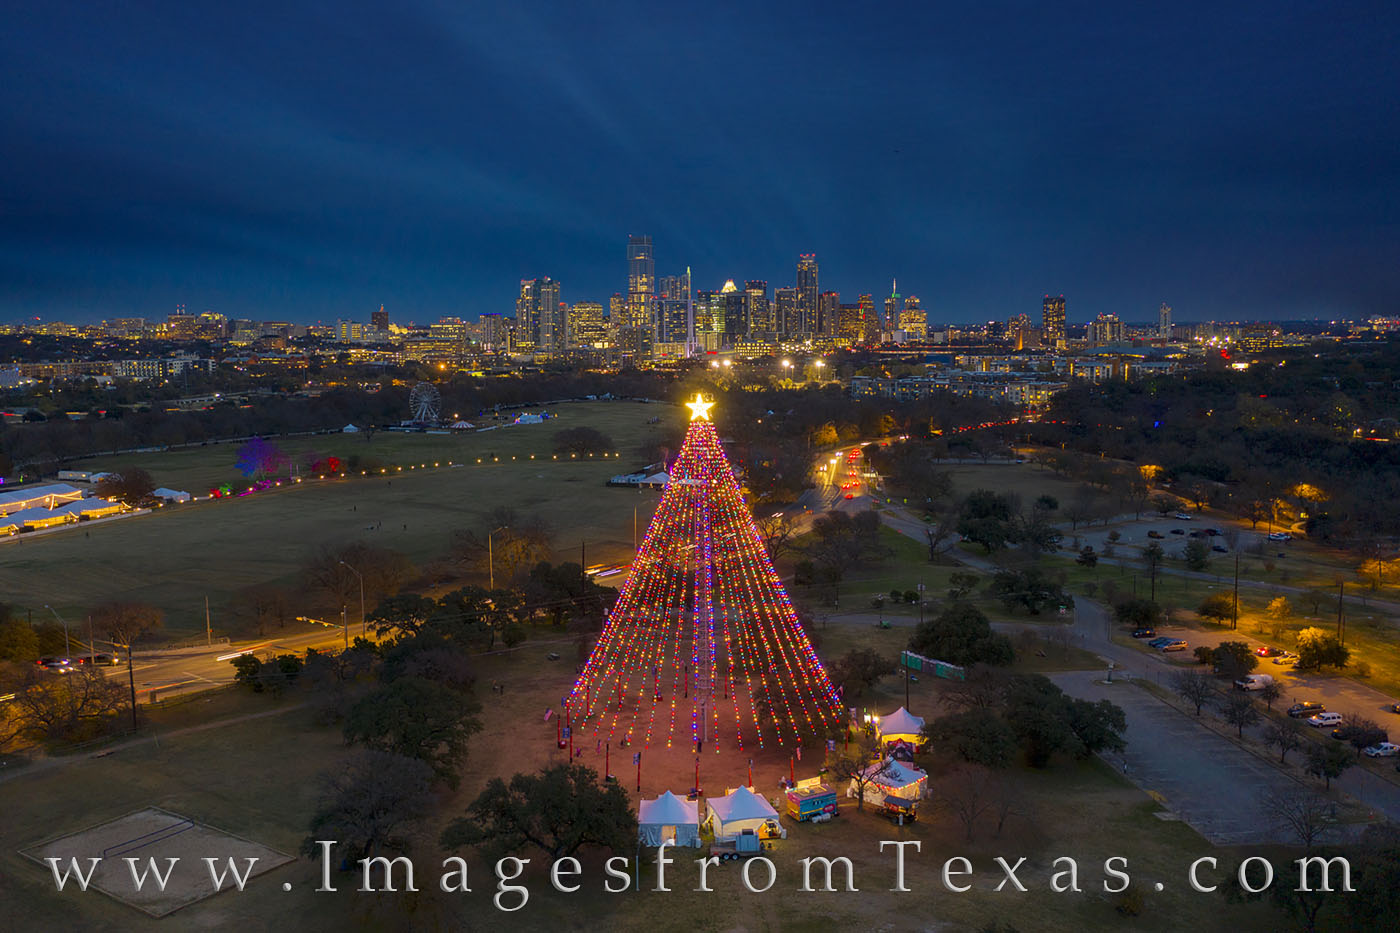 The Zilker Park Christmas Tree shines in the cool December night and the beautiful skyline of Austin lights up as night falls...